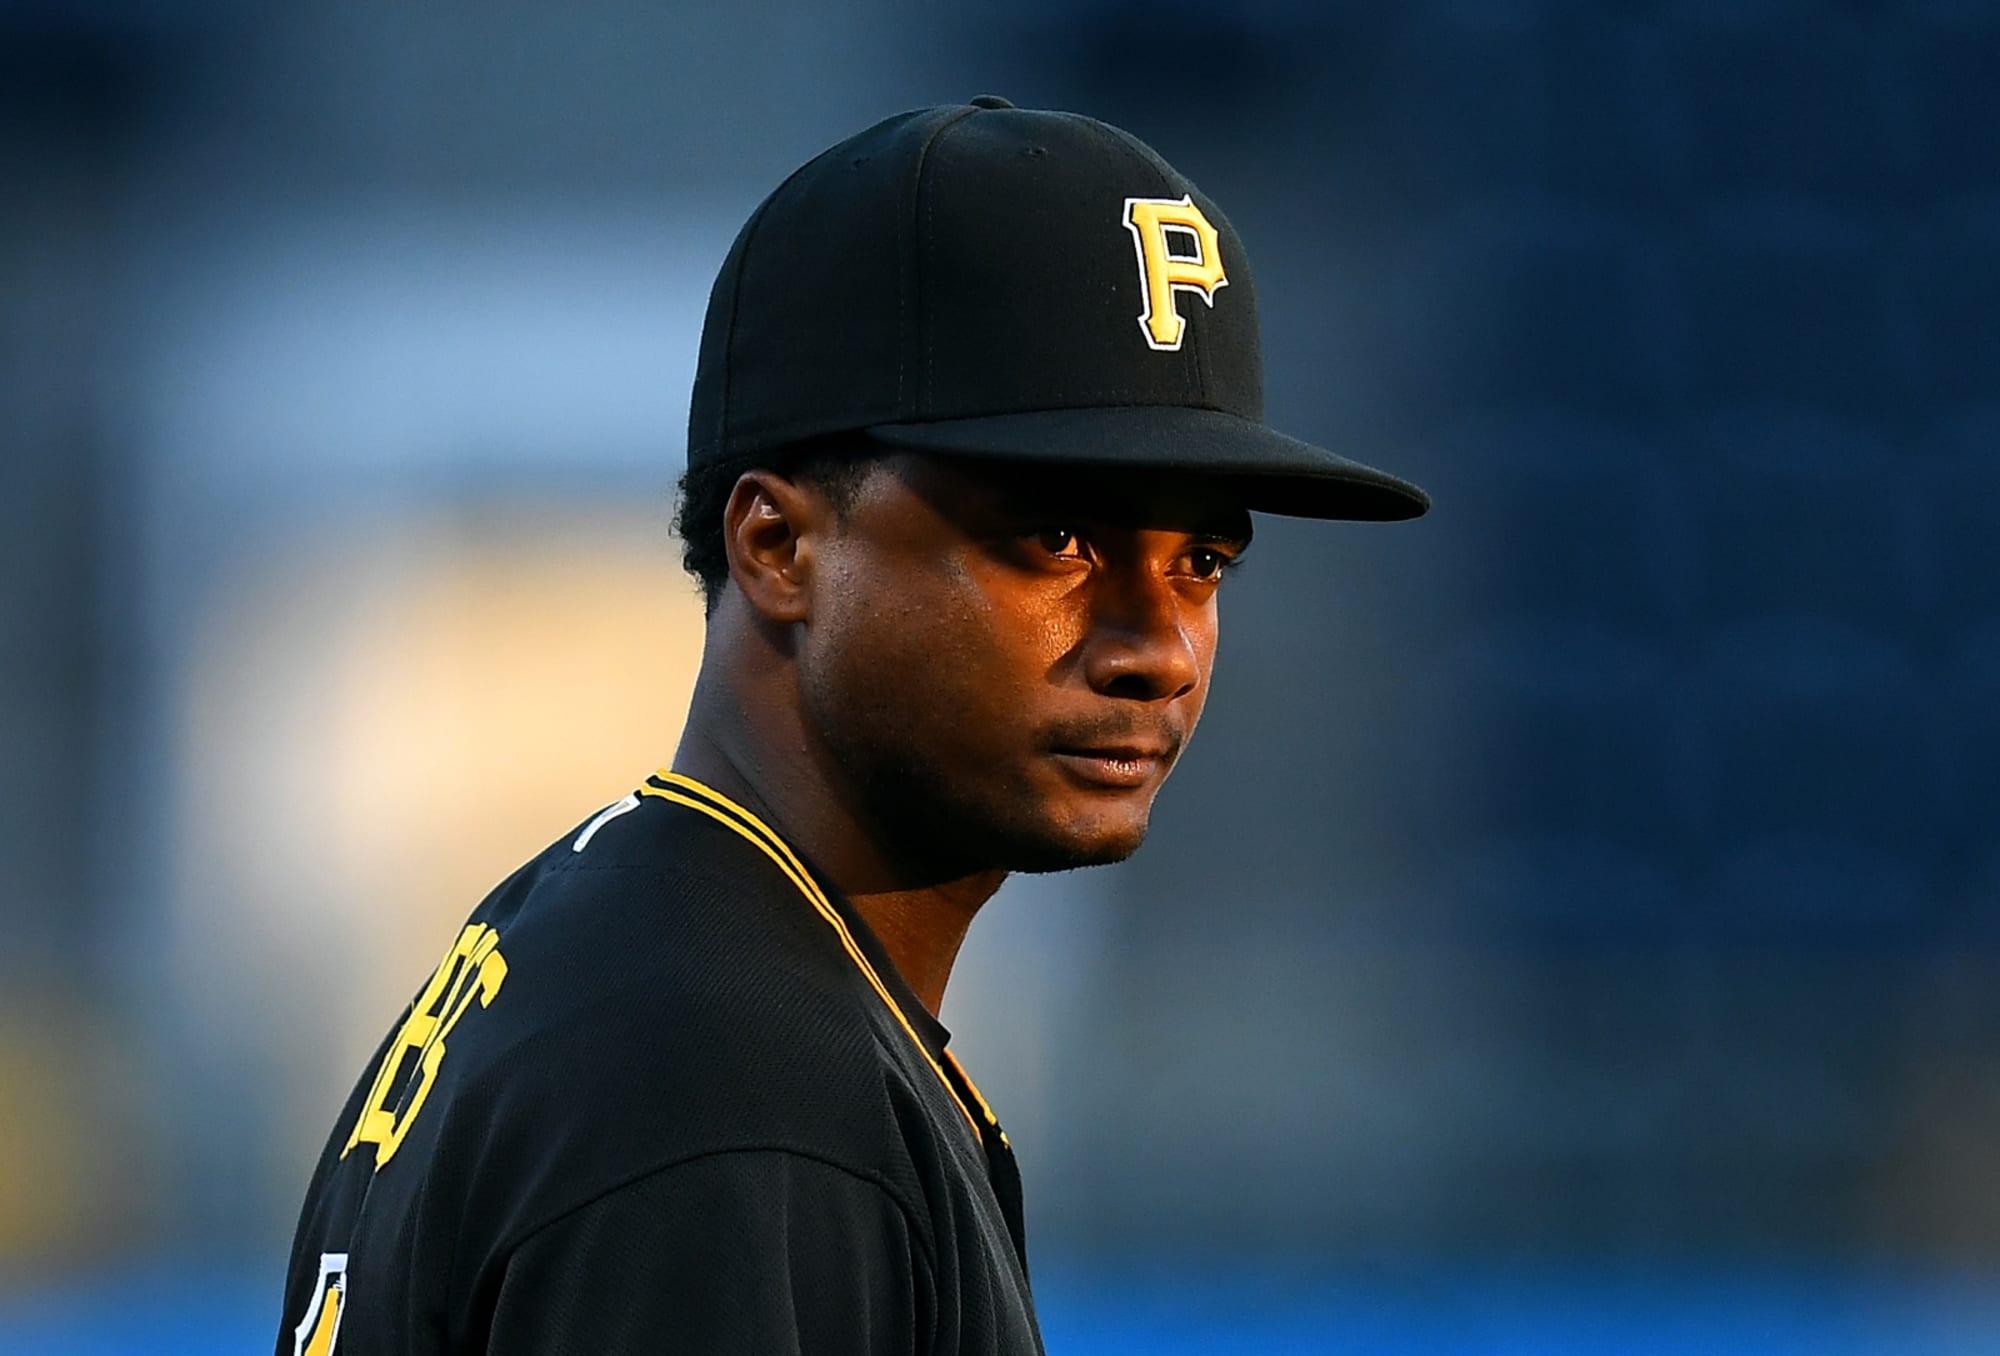 pittsburgh-pirates-players-who-could-have-breakout-seasons-in-2015